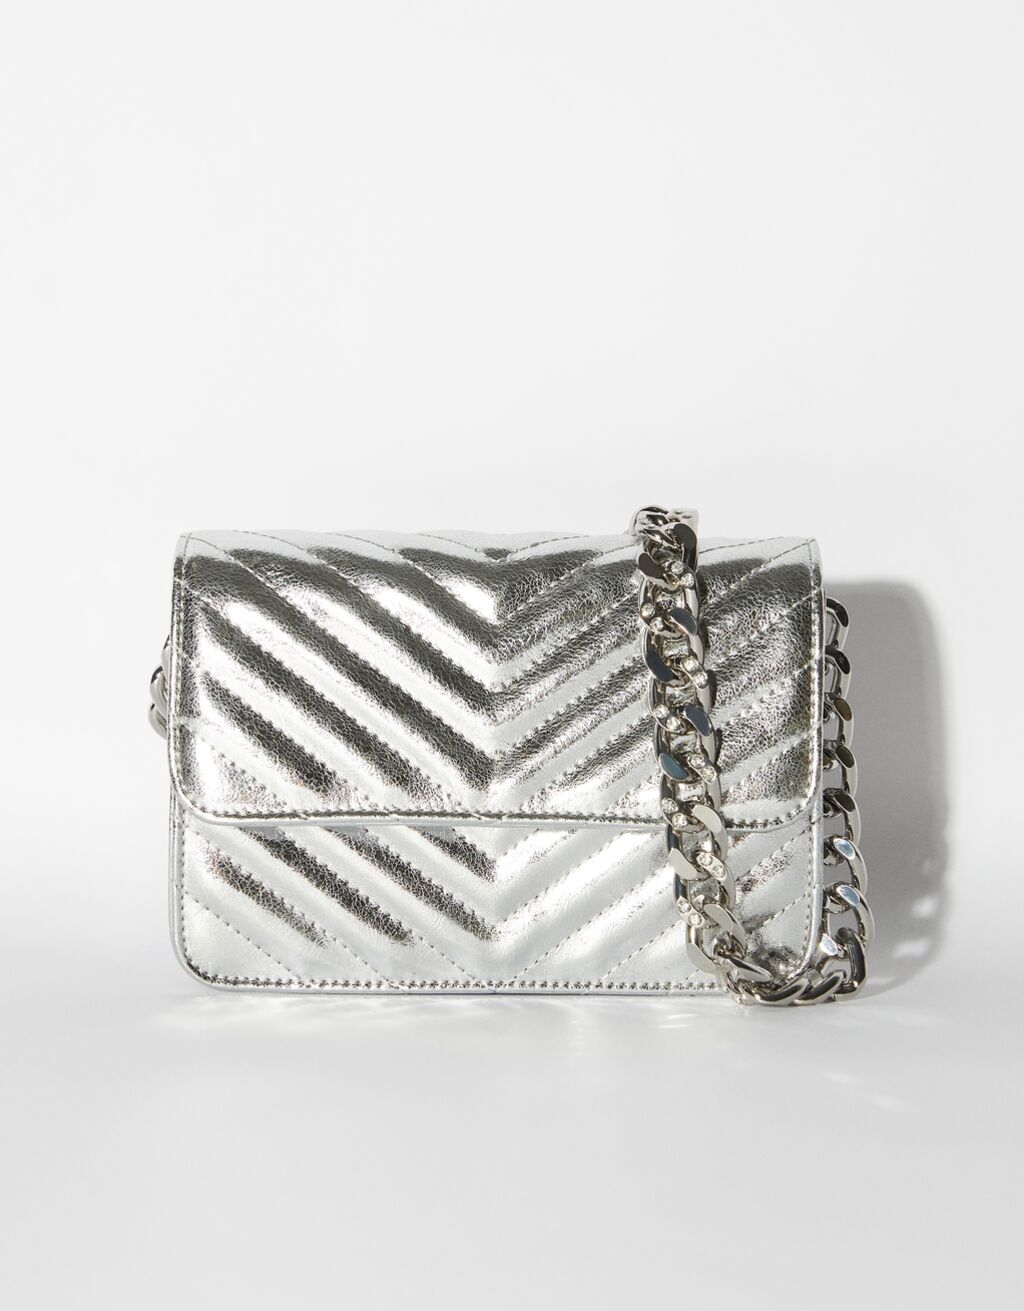 Metallic quilted bag